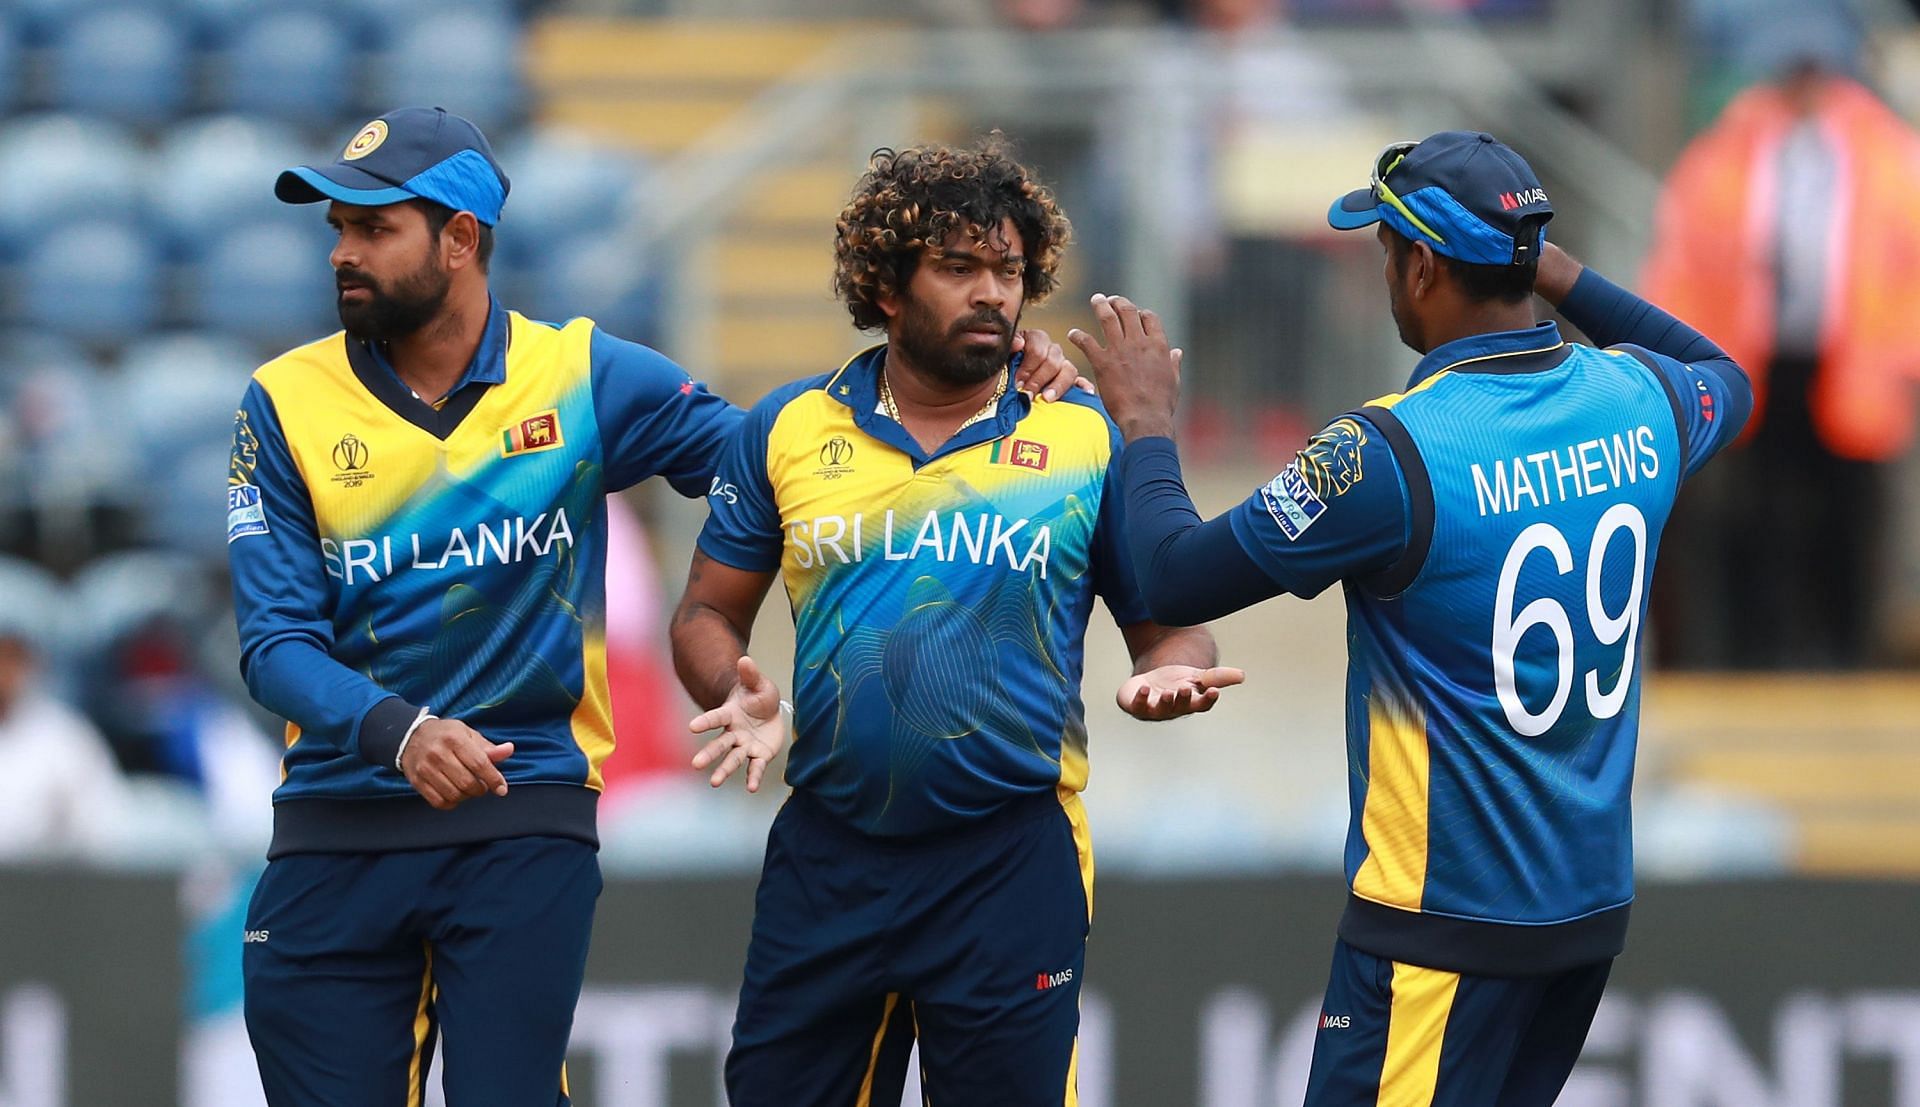 Lasith Malinga celebrating during the Afghanistan v Sri Lanka - ICC Cricket World Cup 2019 [Getty Images]